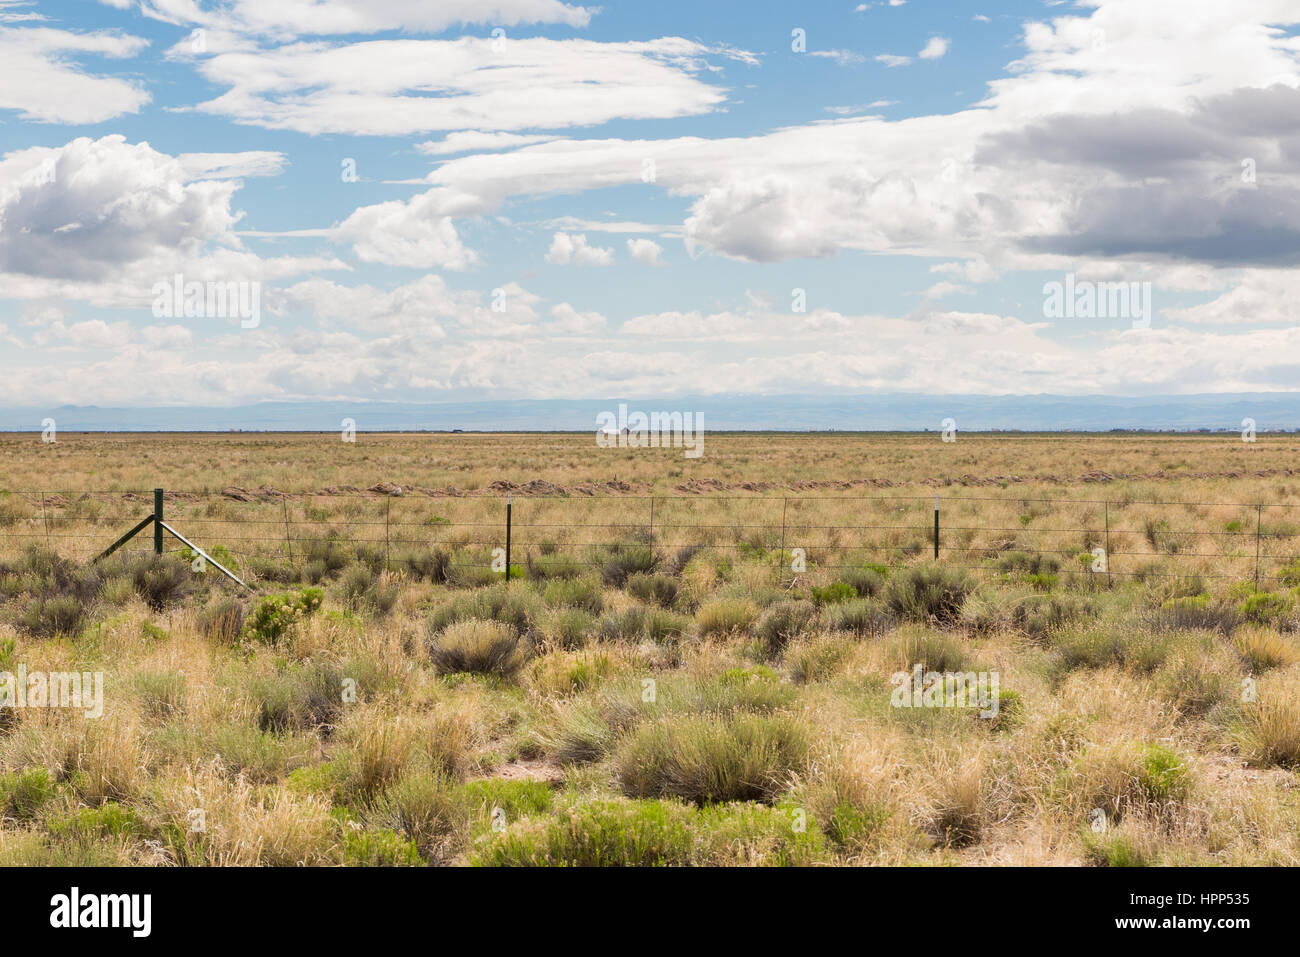 Grass farm field, flat plains, with a partly cloudy sky Stock Photo